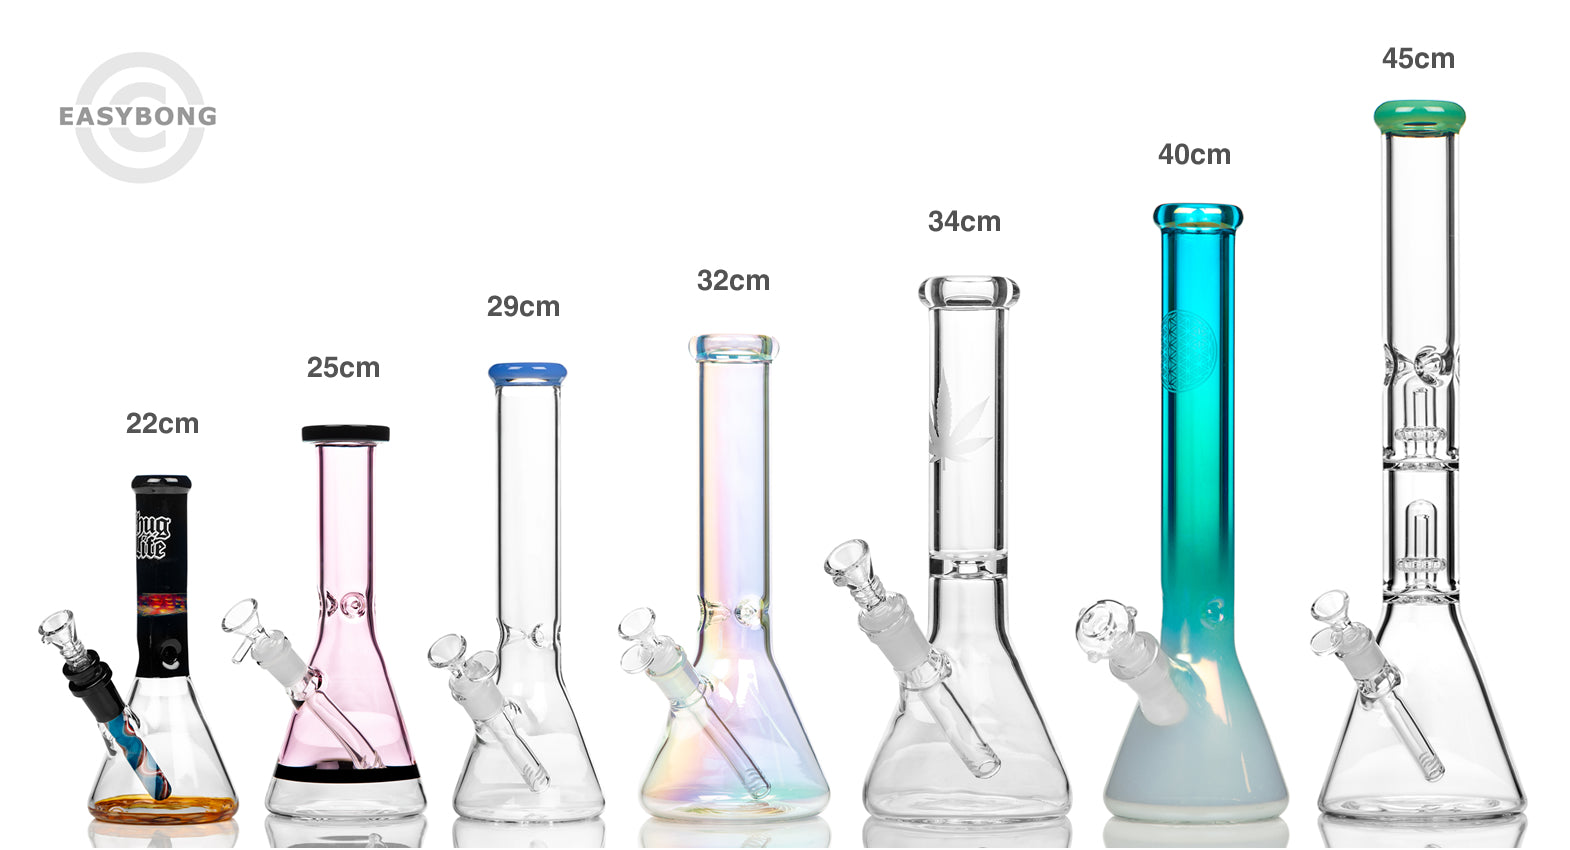 Glass beaker bong size chart from small to large at Easy Bong Australia.